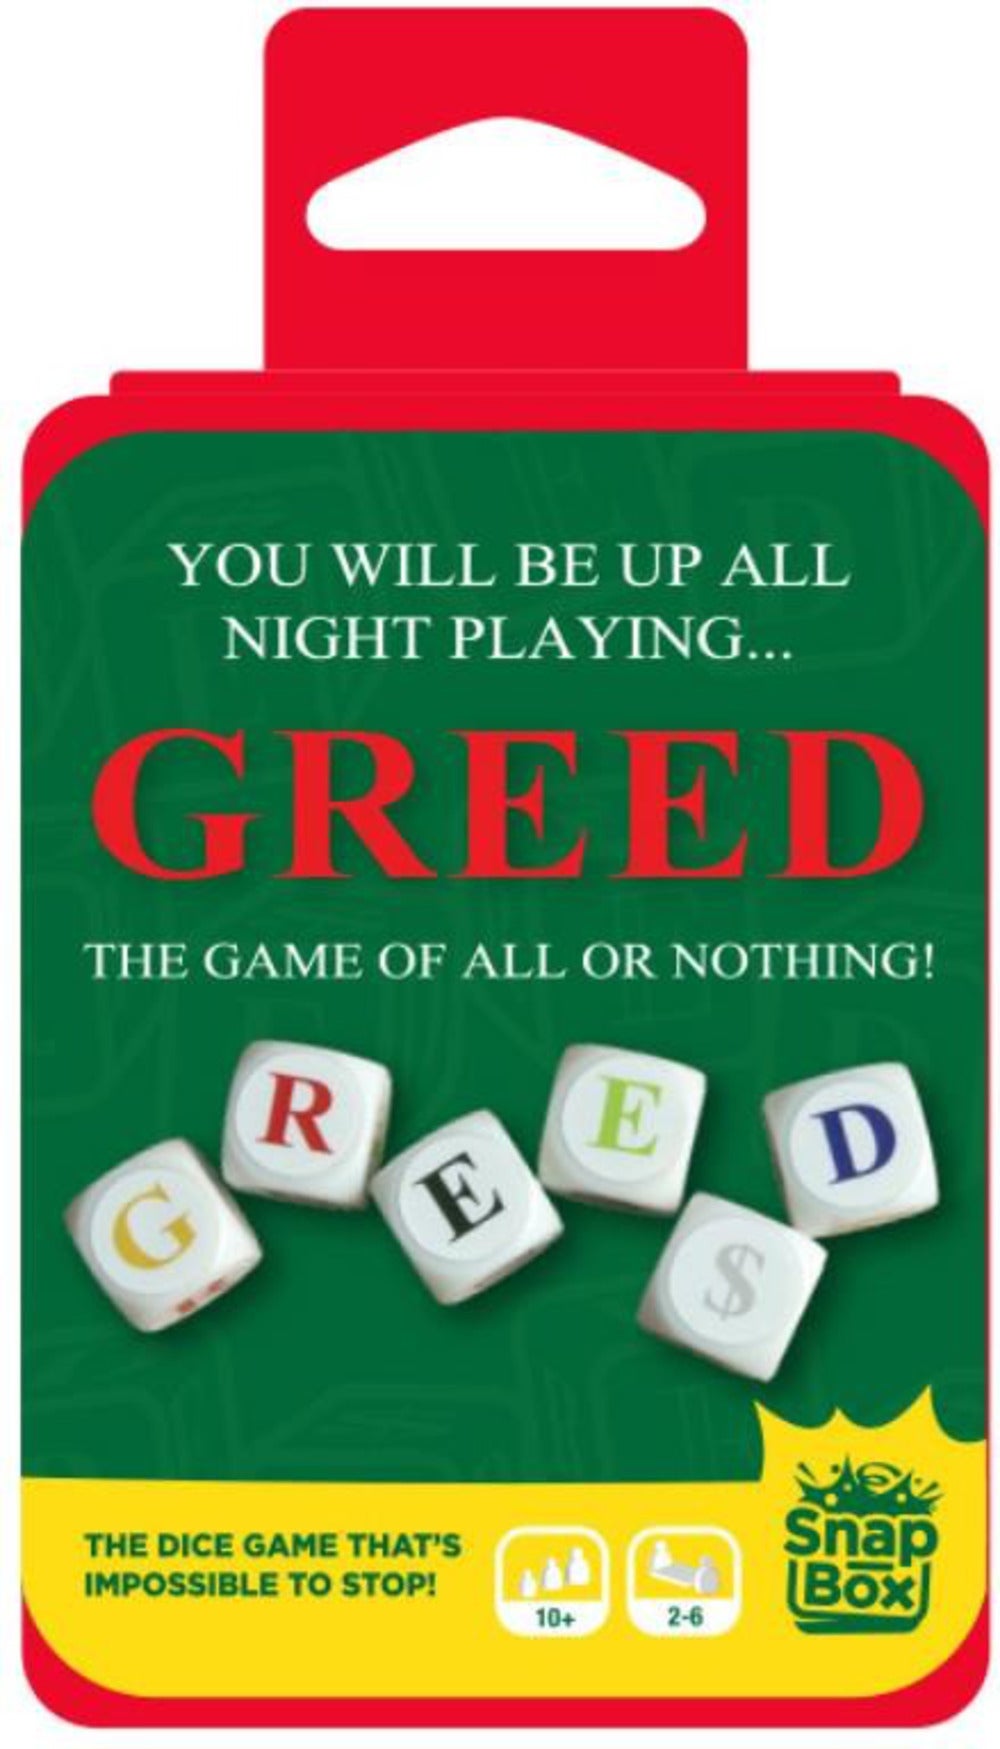 snapbox-greed-dice-game-whitcoulls